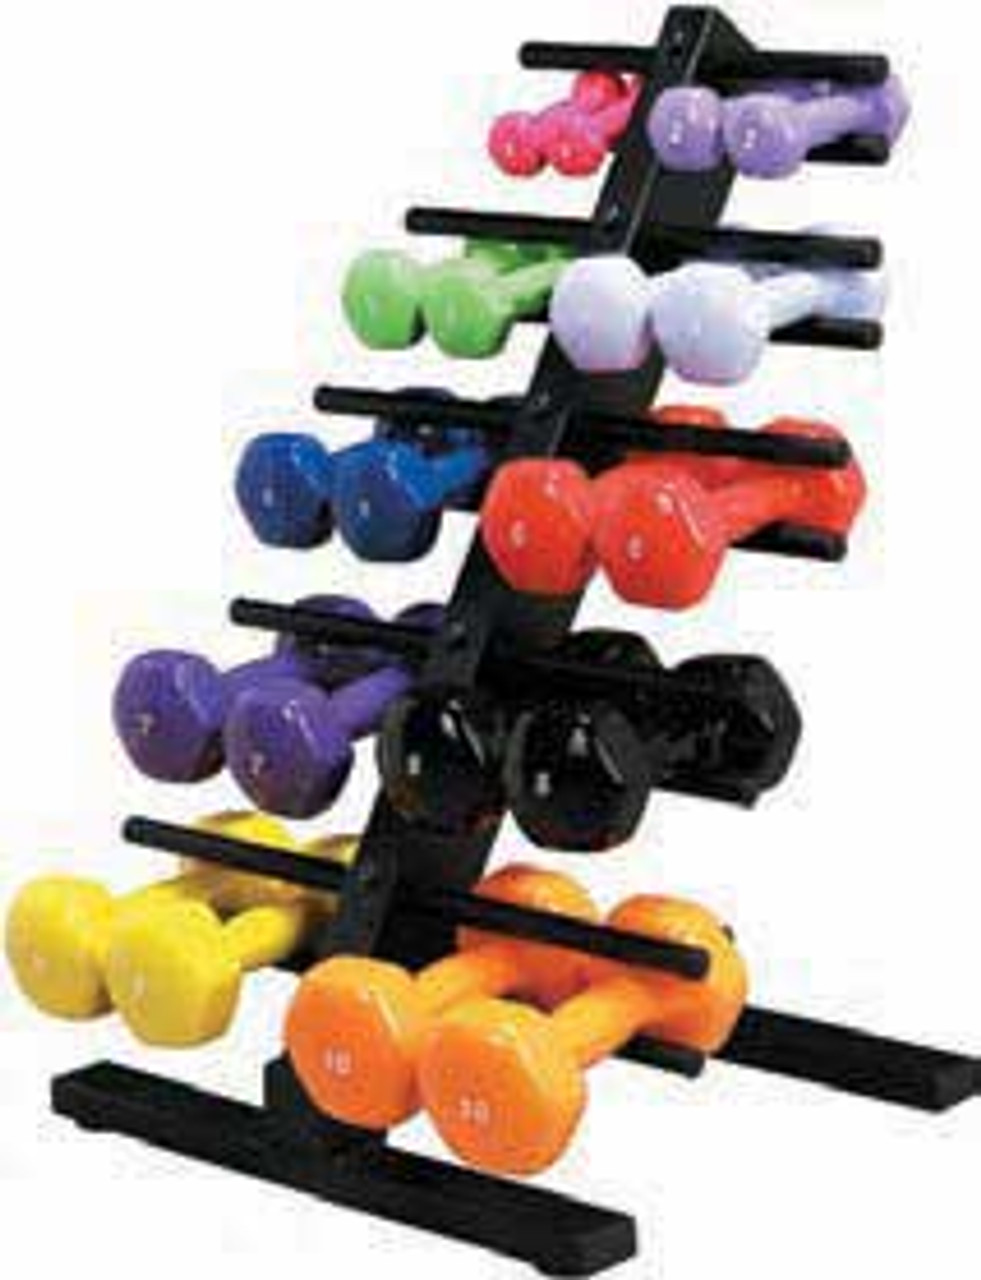 Executie rooster Moet Cando Vinyl Coated Cast Iron Dumbbell Set - 10 Pc w/ Floor Rack -  prohealthcareproducts.com